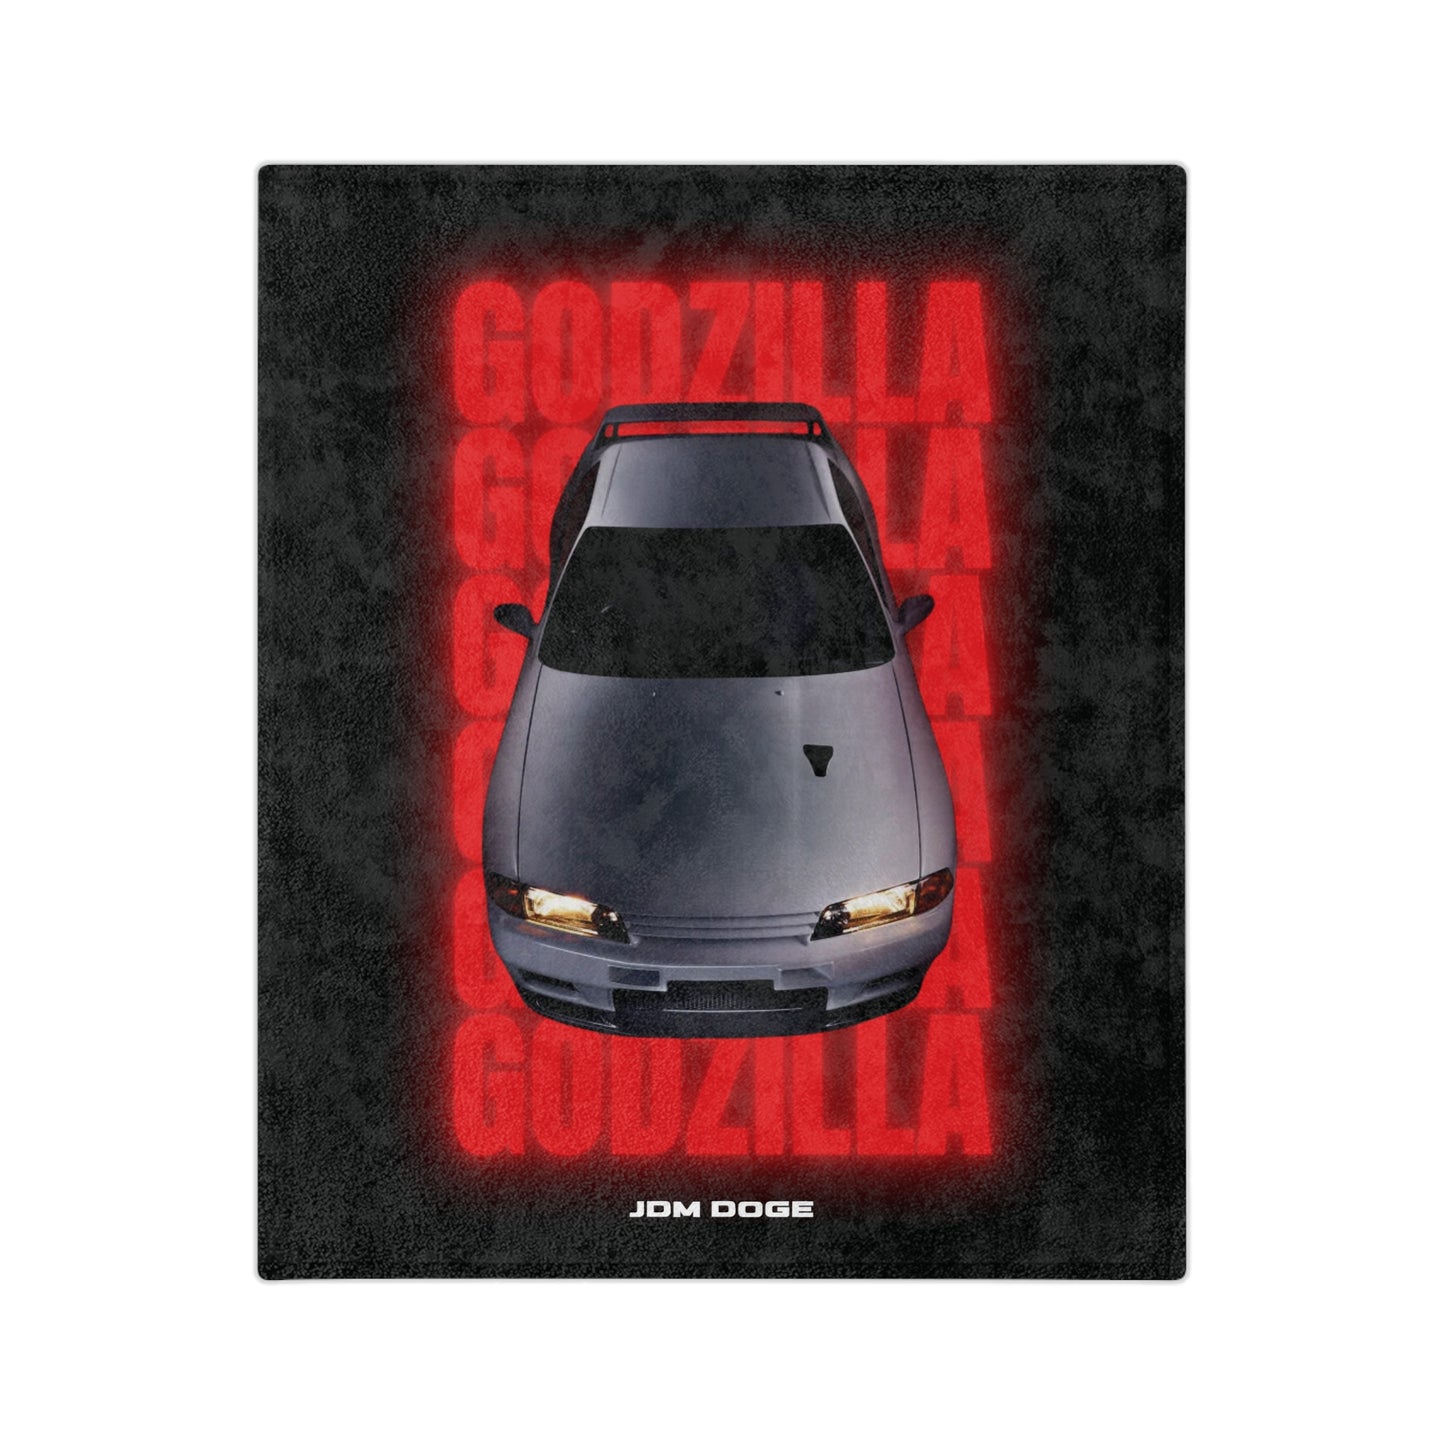 Godzilla R32 Nissan Skyline Car Blanket to Cover your Seats or Bed